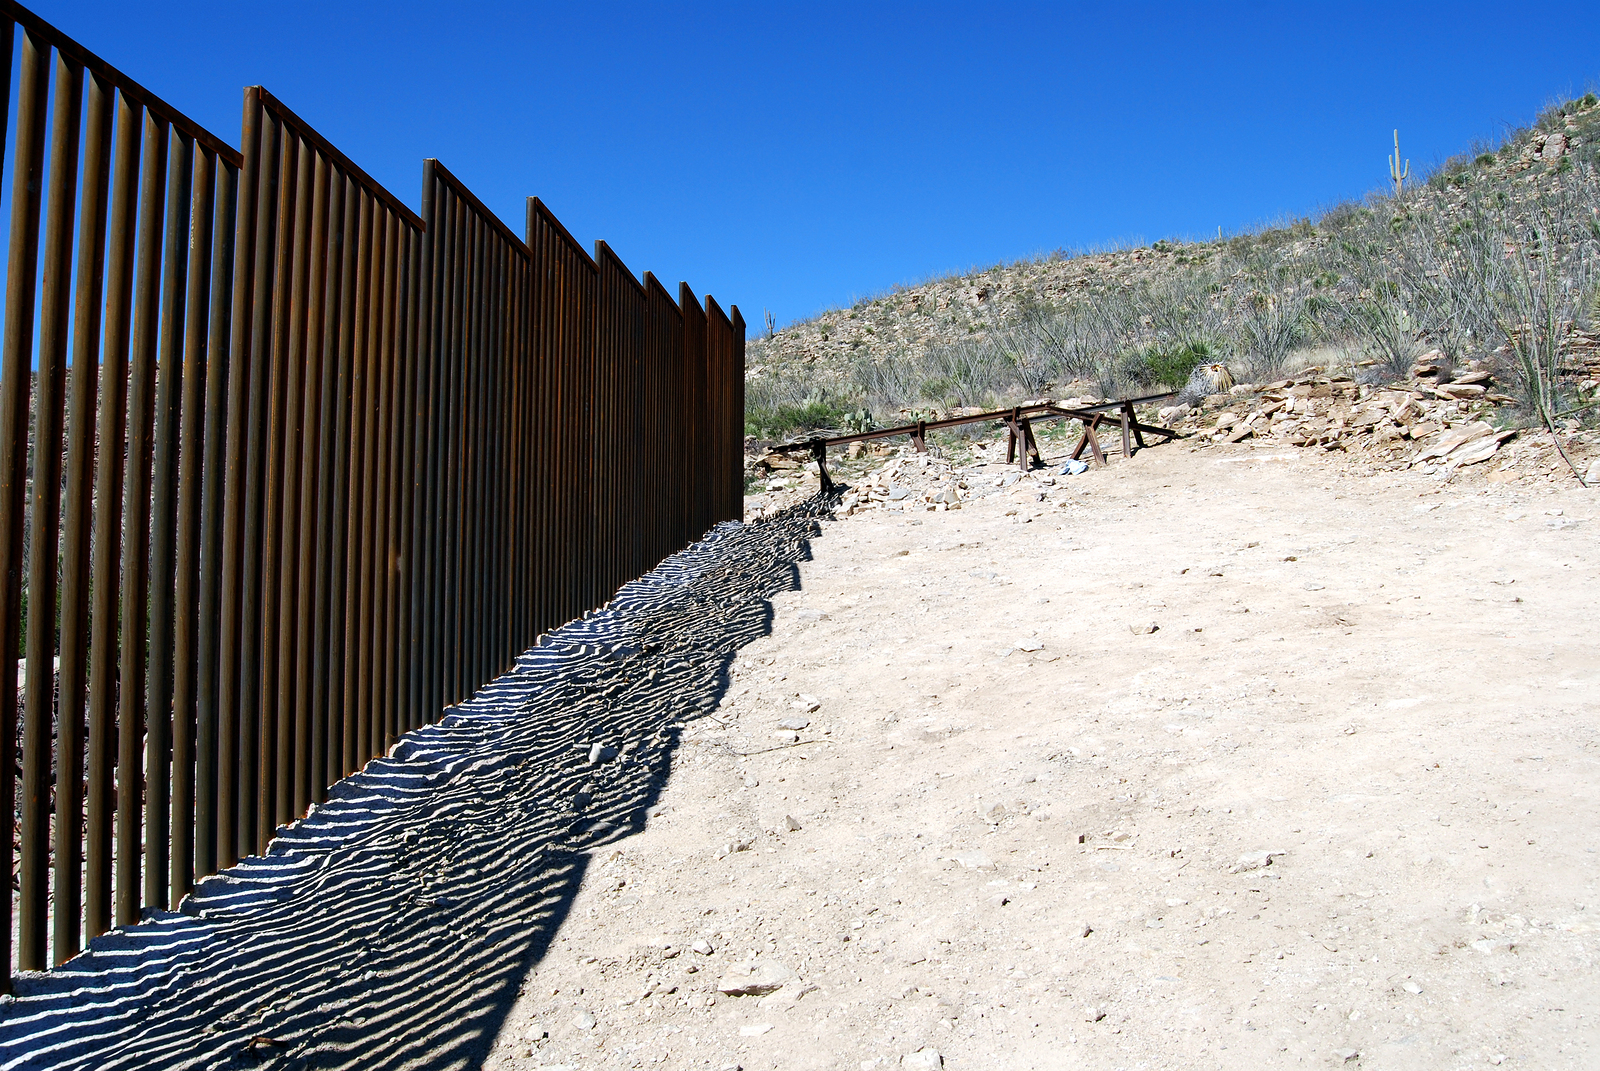 End of border fence between the US and Mexico